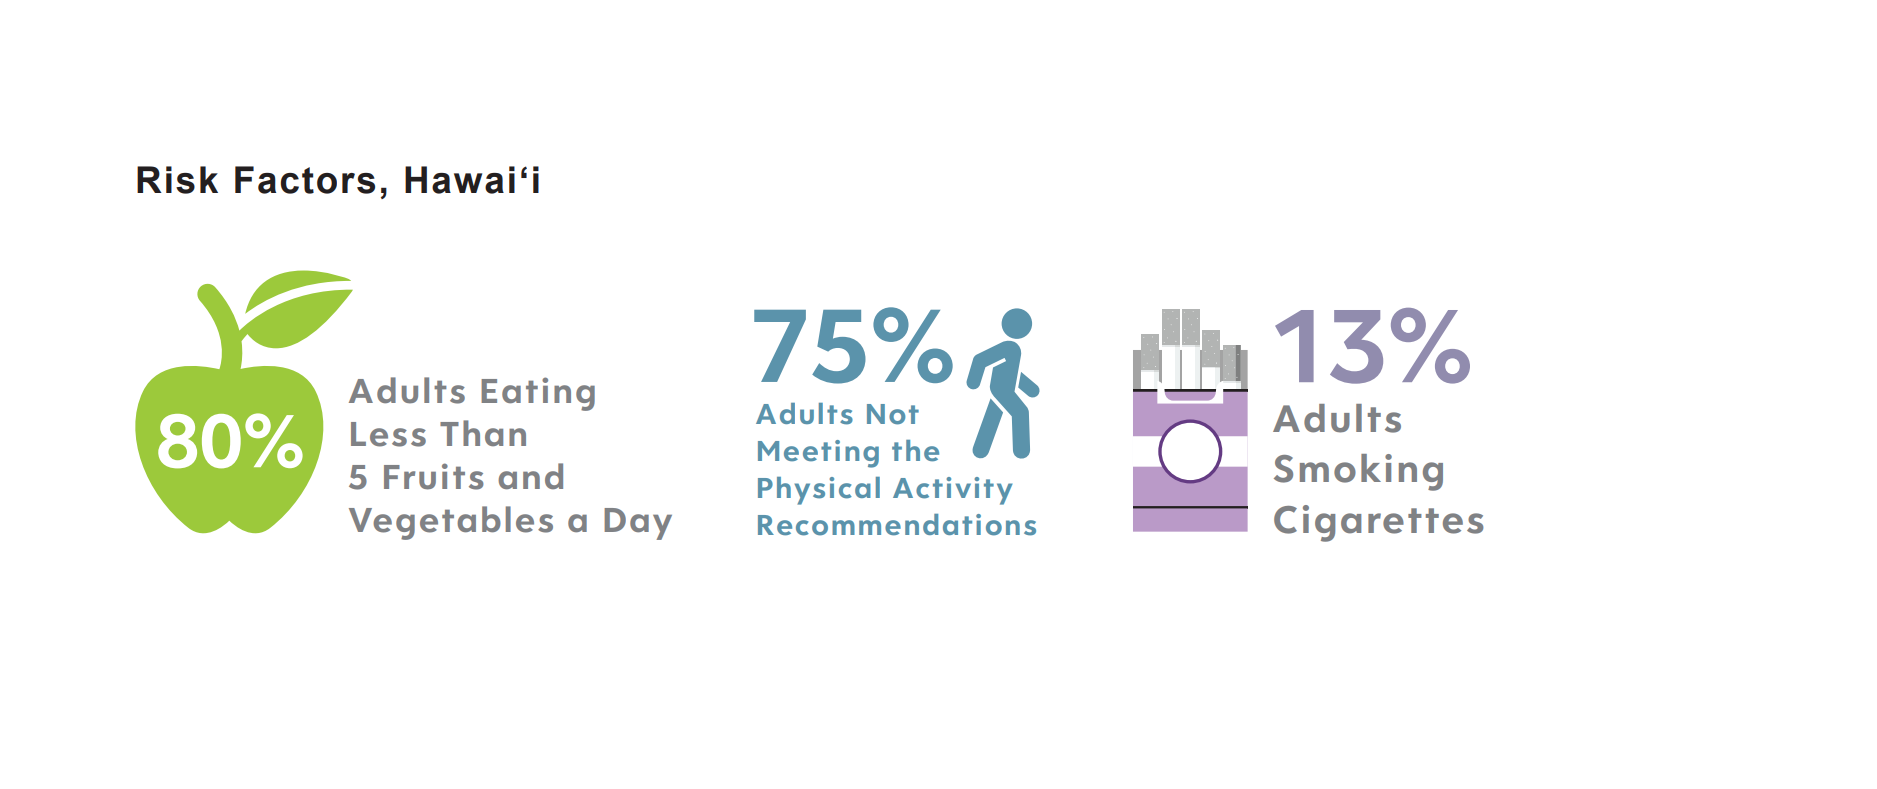 Risk Factors Hawaii 80% Adults Eating Less than 5 Fruits and Vegetables a Day 75% Adults Not Meeting the Physical Activity Recommendations 13% Adults Smoking Cigarettes